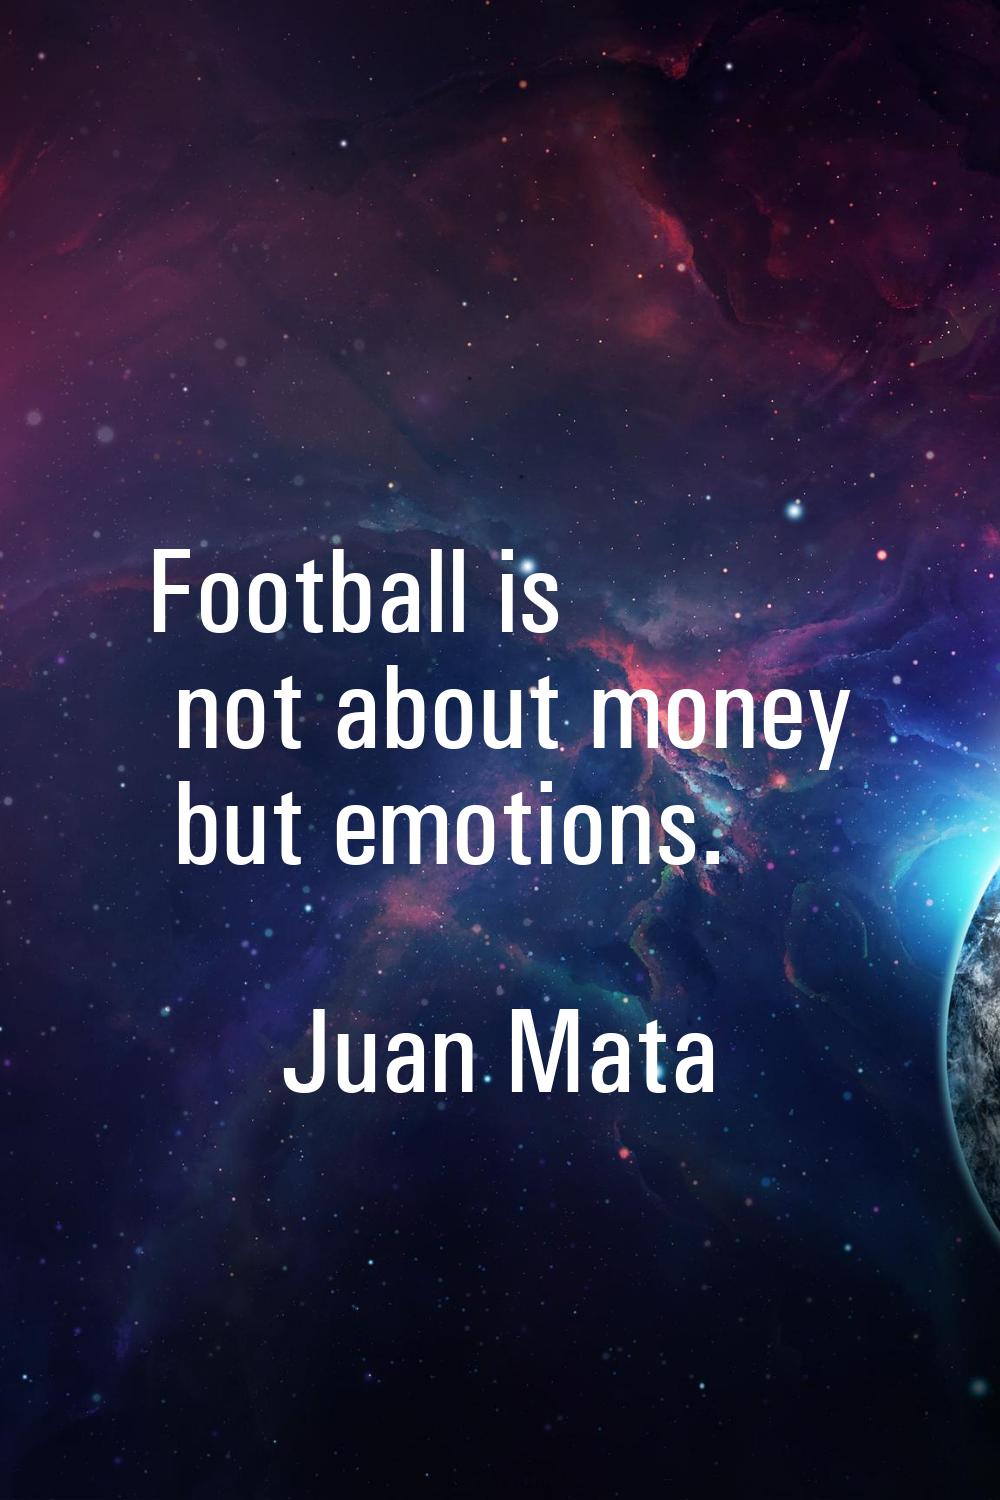 Football is not about money but emotions.